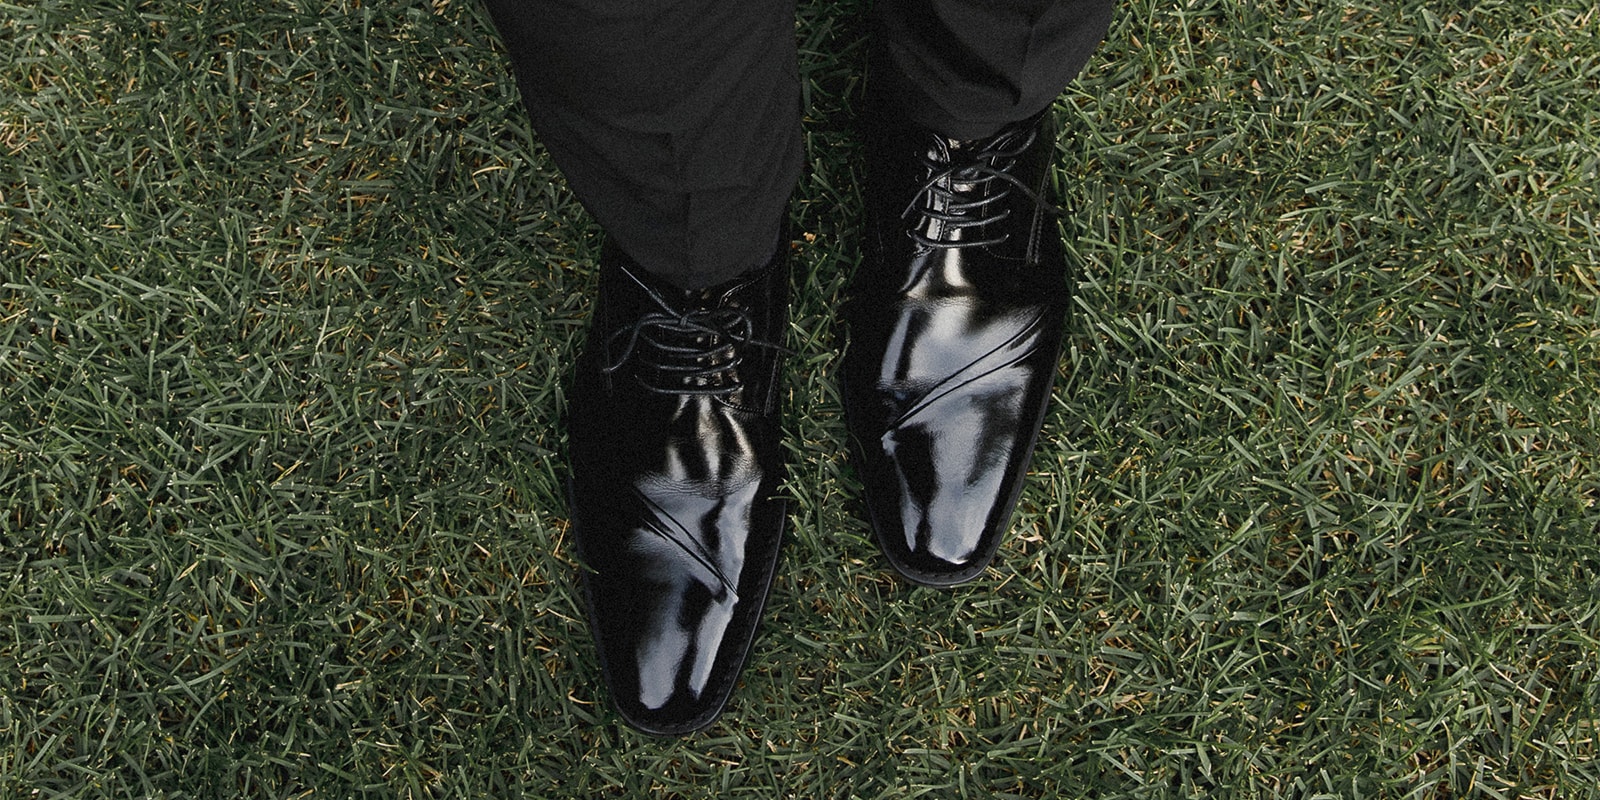 The featured image is the Talmadge Folded Vamp Oxford in Black.